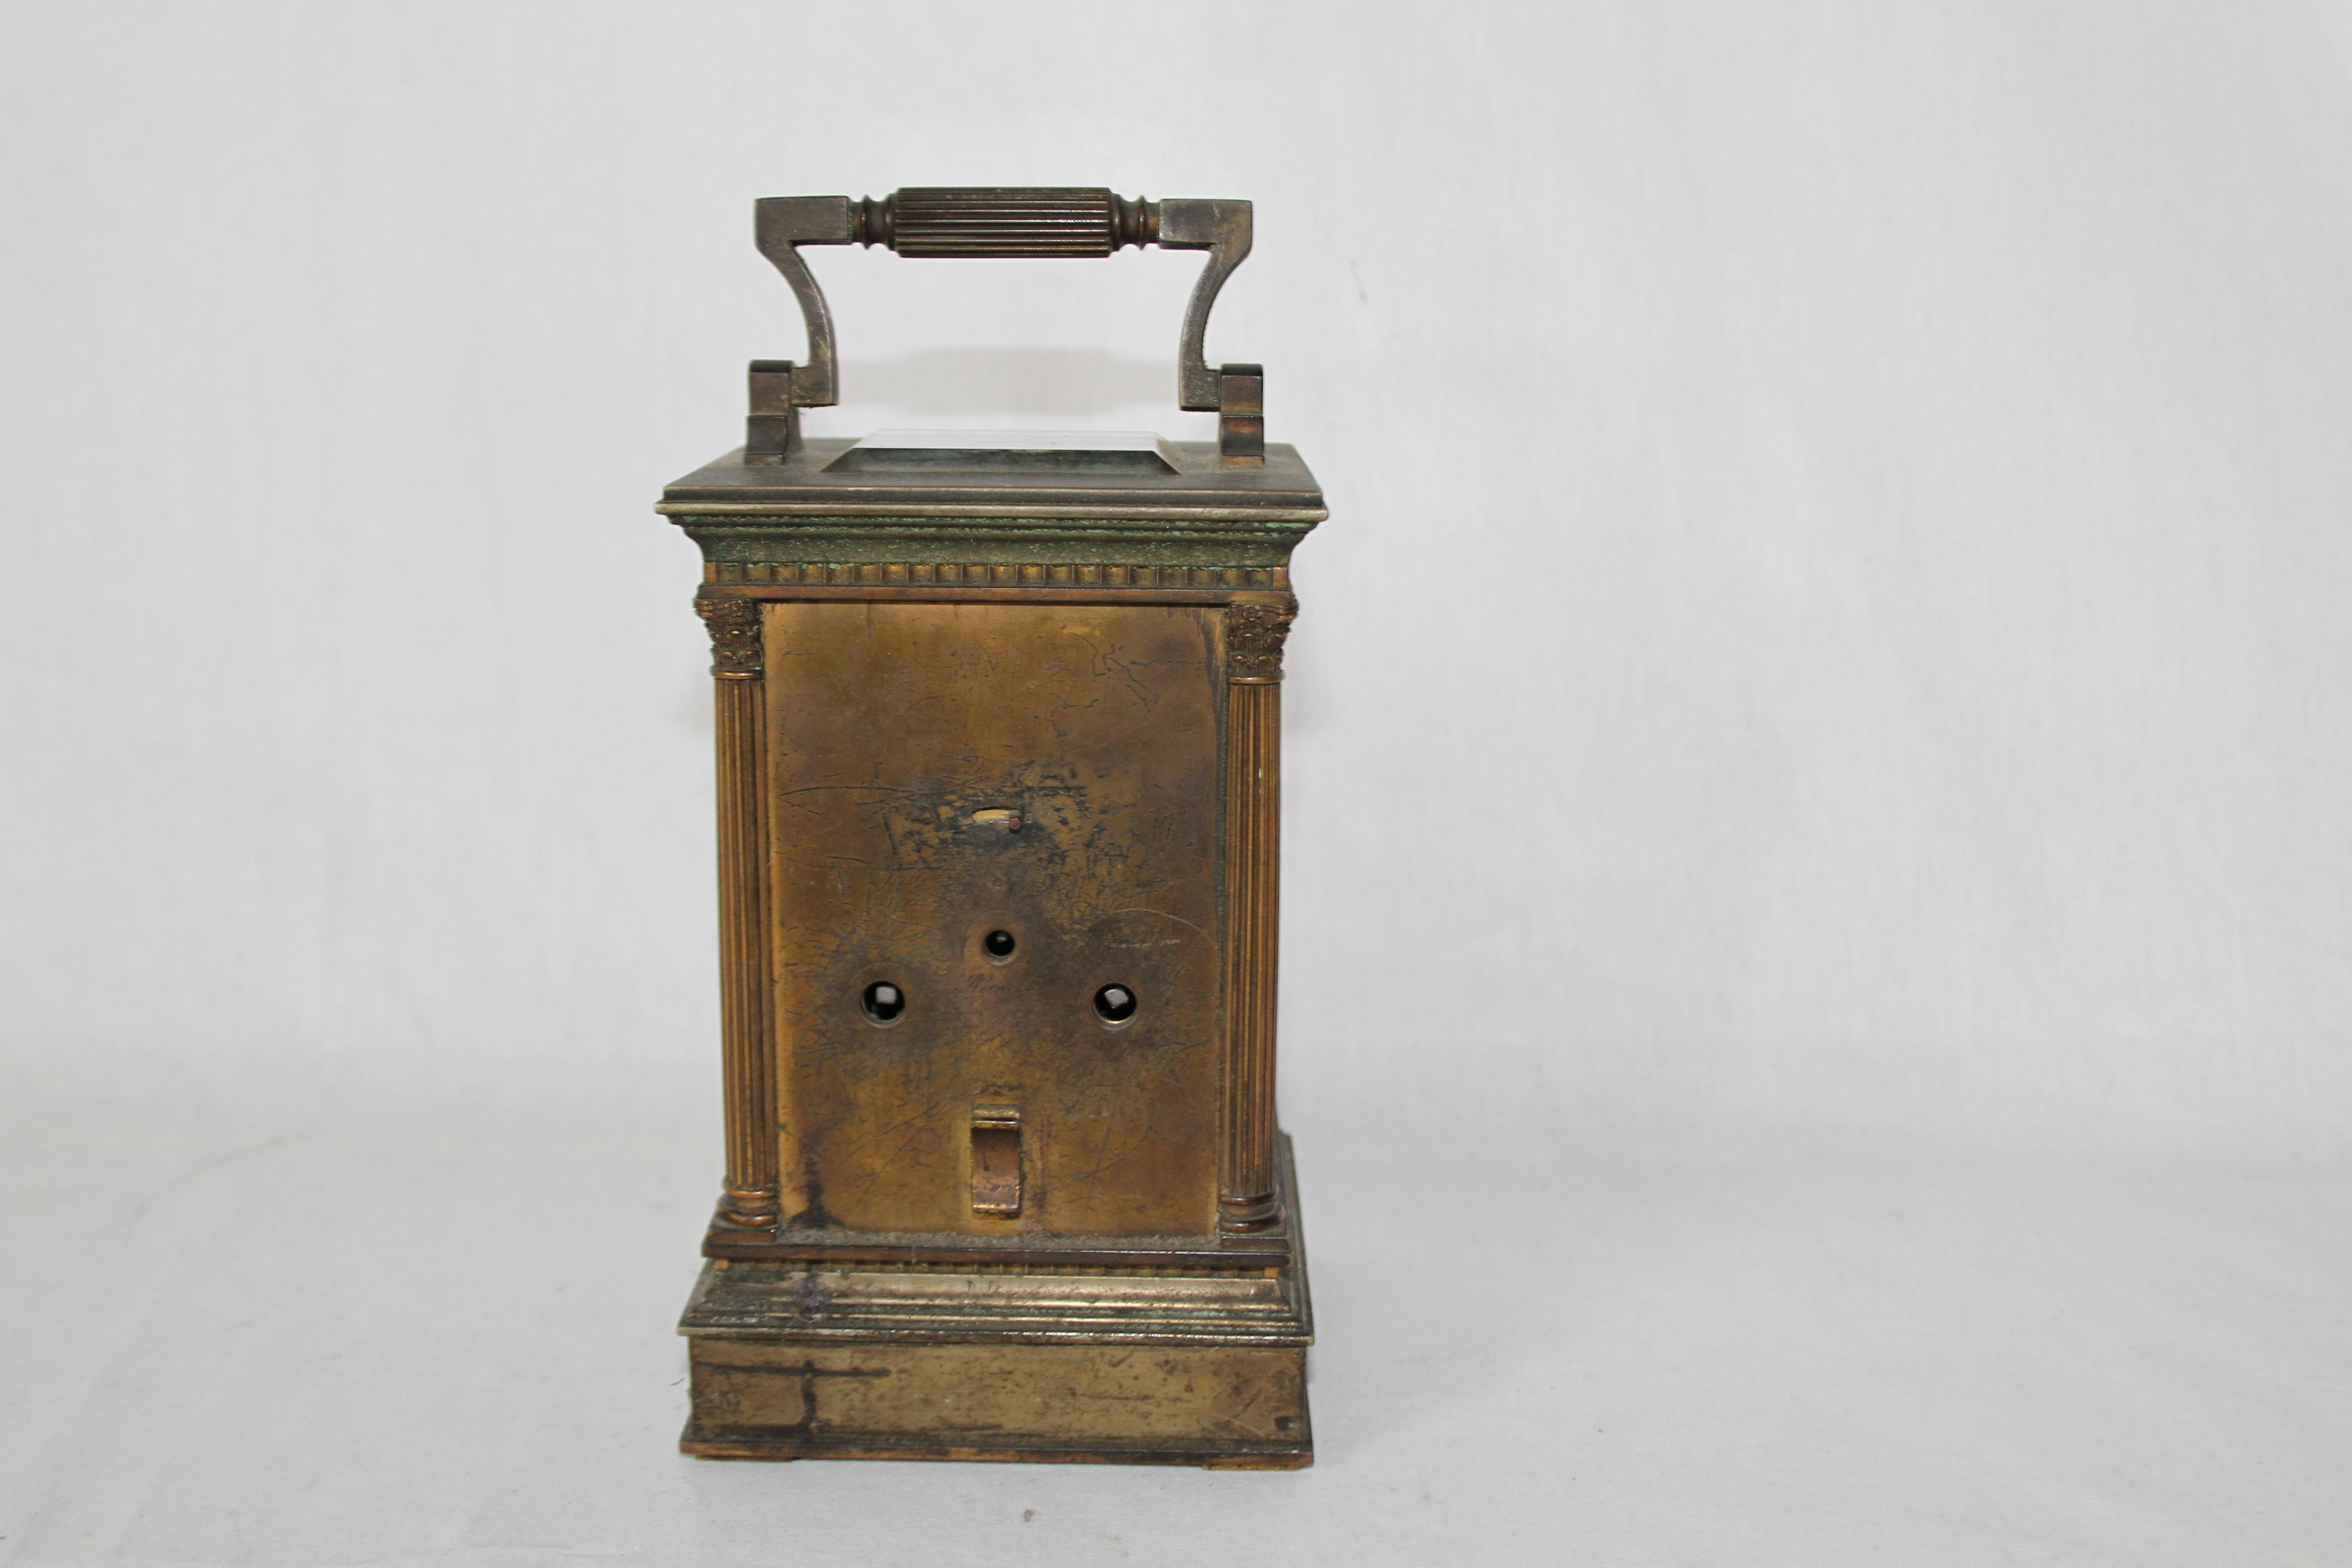 Hand-Crafted 19th Century French Carriage Clock with Repeat Button For Sale